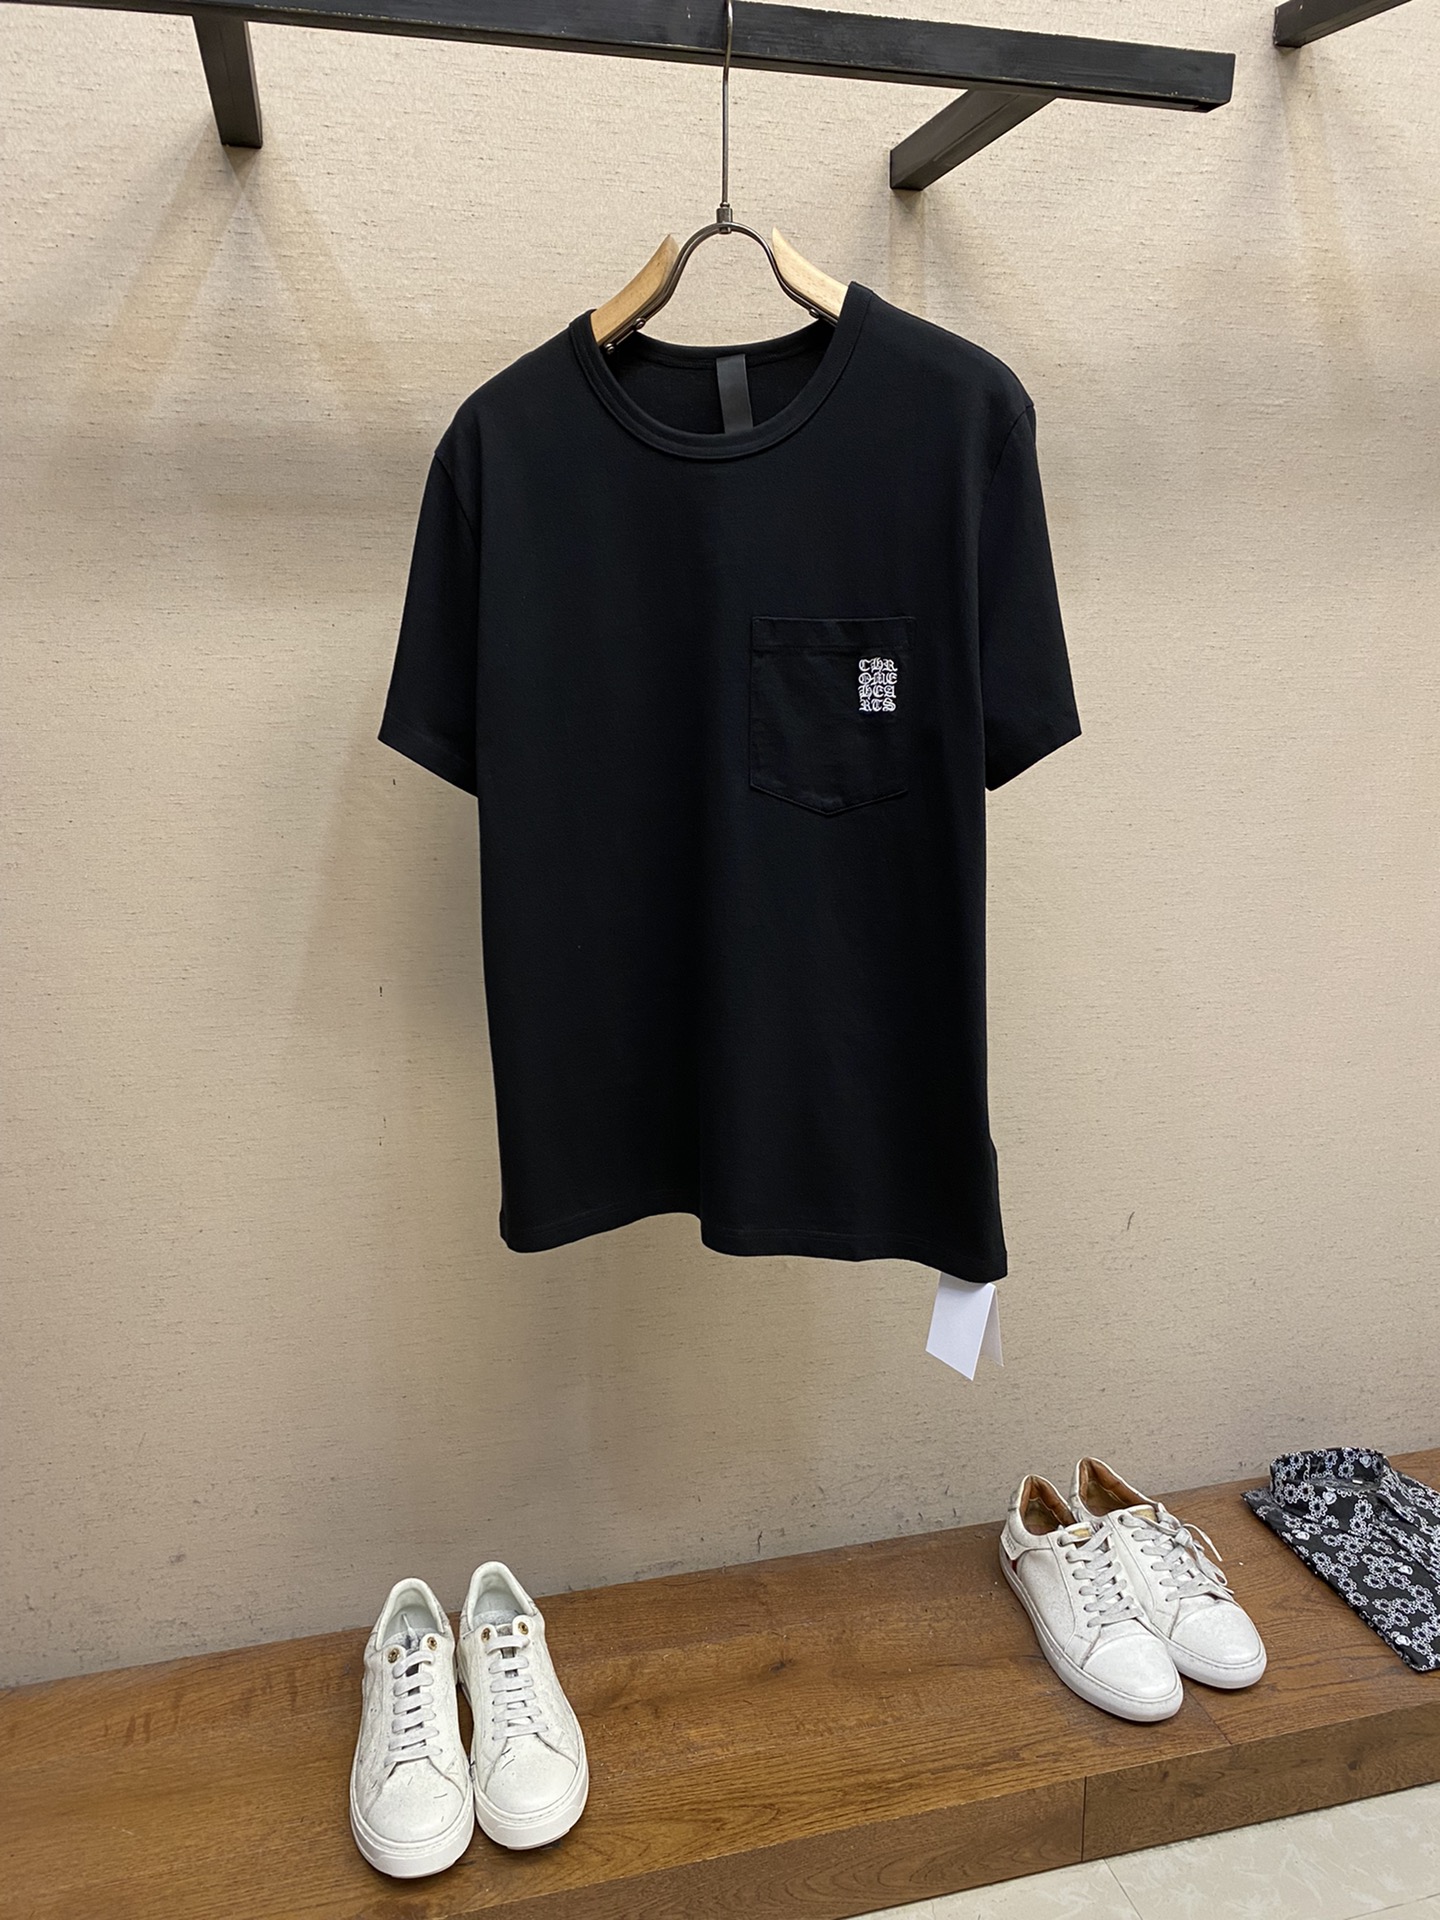 Chrome Hearts Clothing T-Shirt Black White Embroidery Combed Cotton Summer Collection Short Sleeve